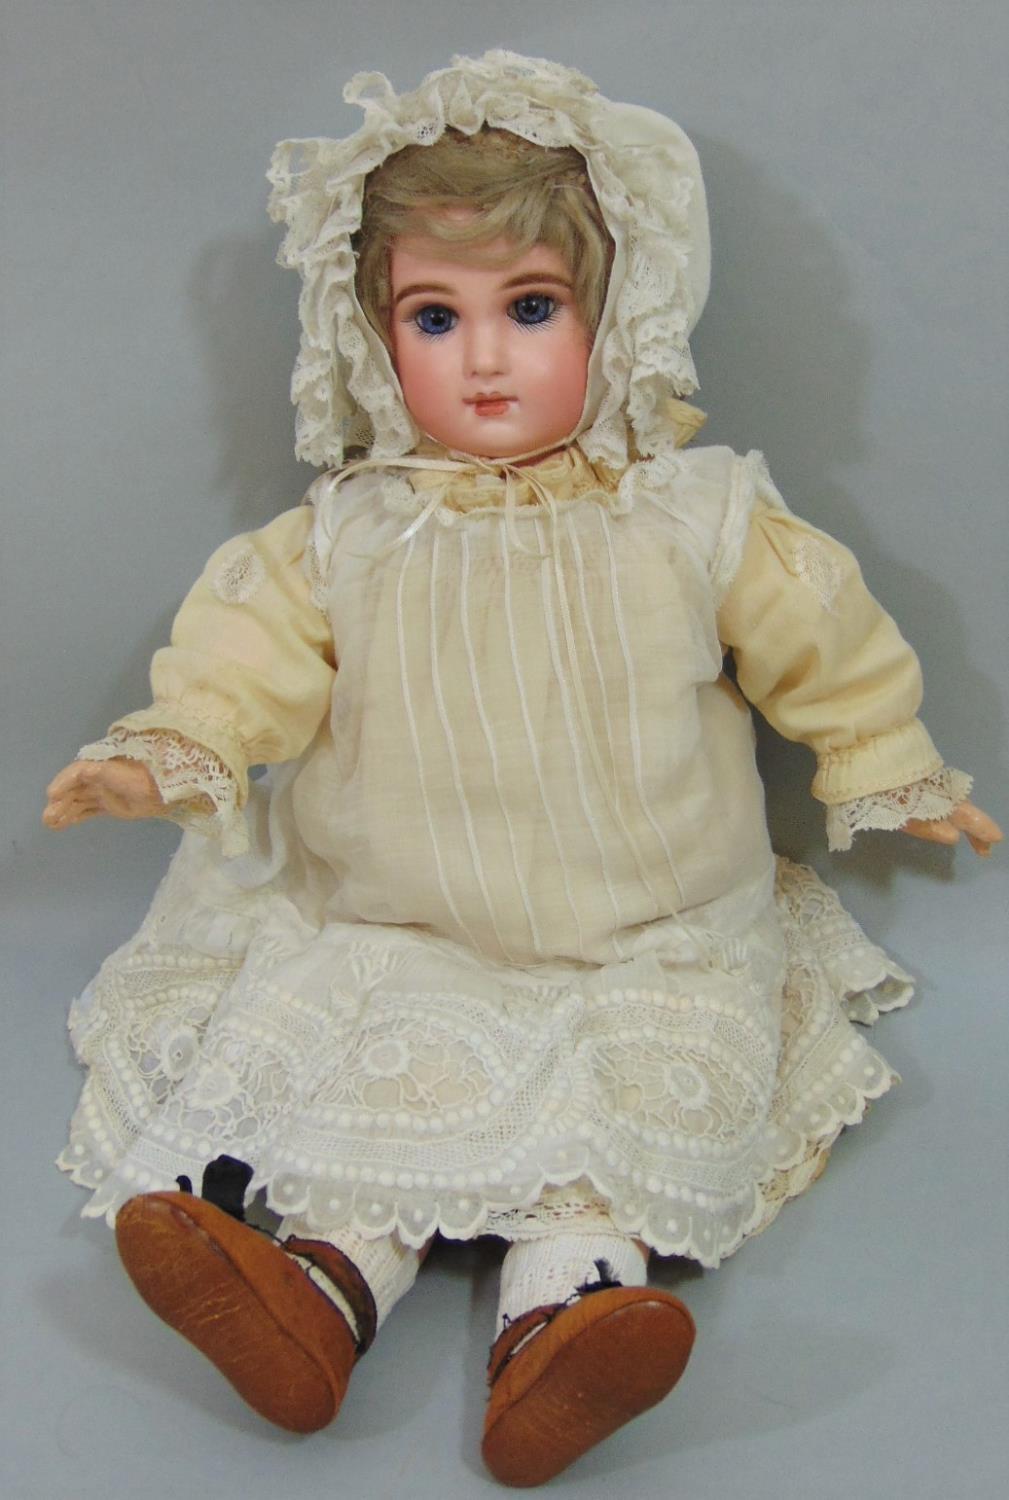 Jumeau bisque socket head doll with jointed composition body, with fixed blue eyes, painted